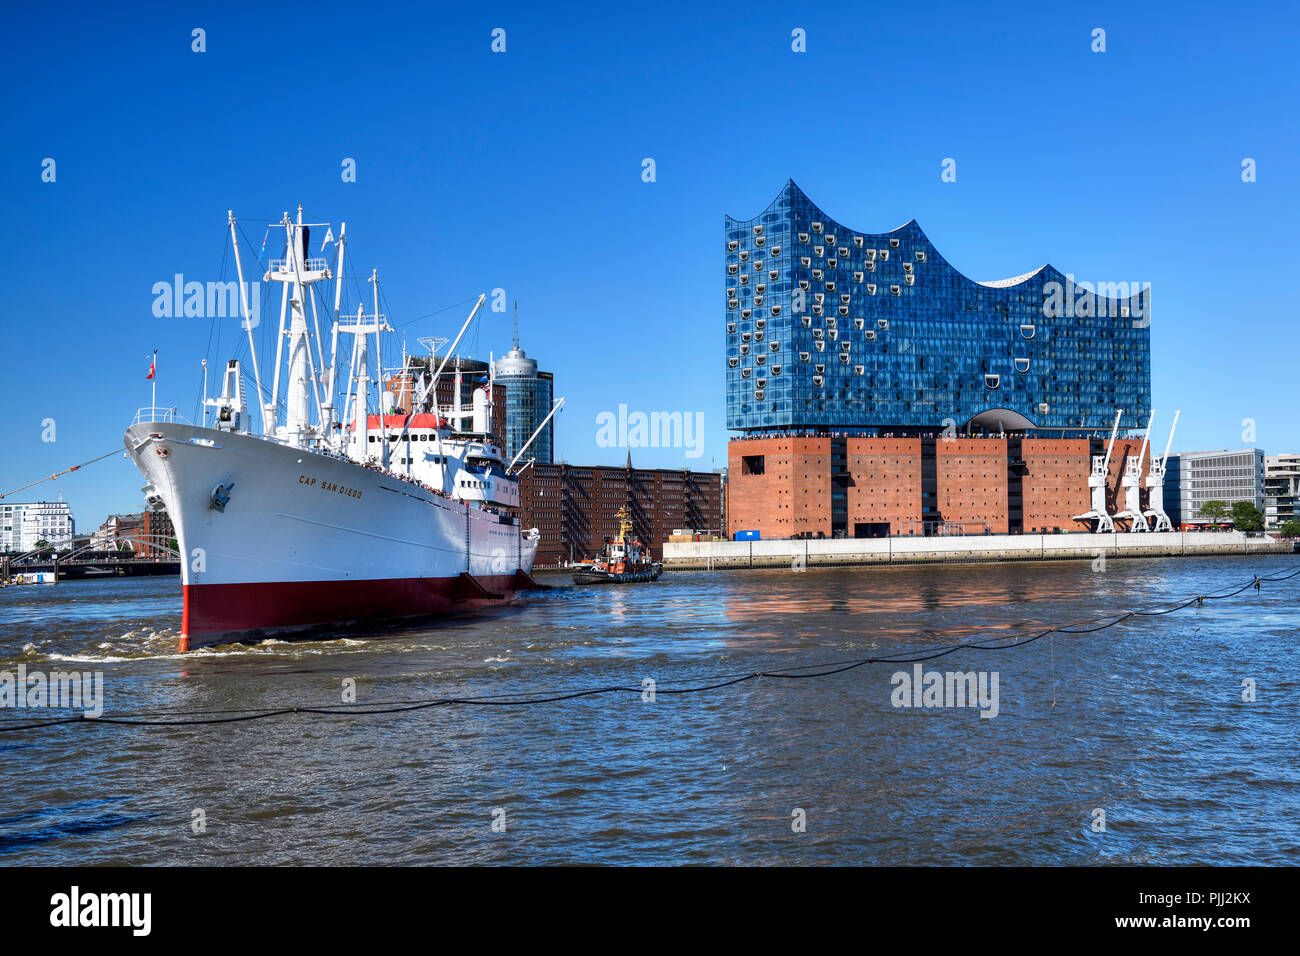 Museum ship Cap San Diego in the Elbphilharmonie in Hamburg, Germany, Europe, Museumsschiff Cap San Diego an der Elbphilharmonie in Hamburg, Deutschla Stock Photo